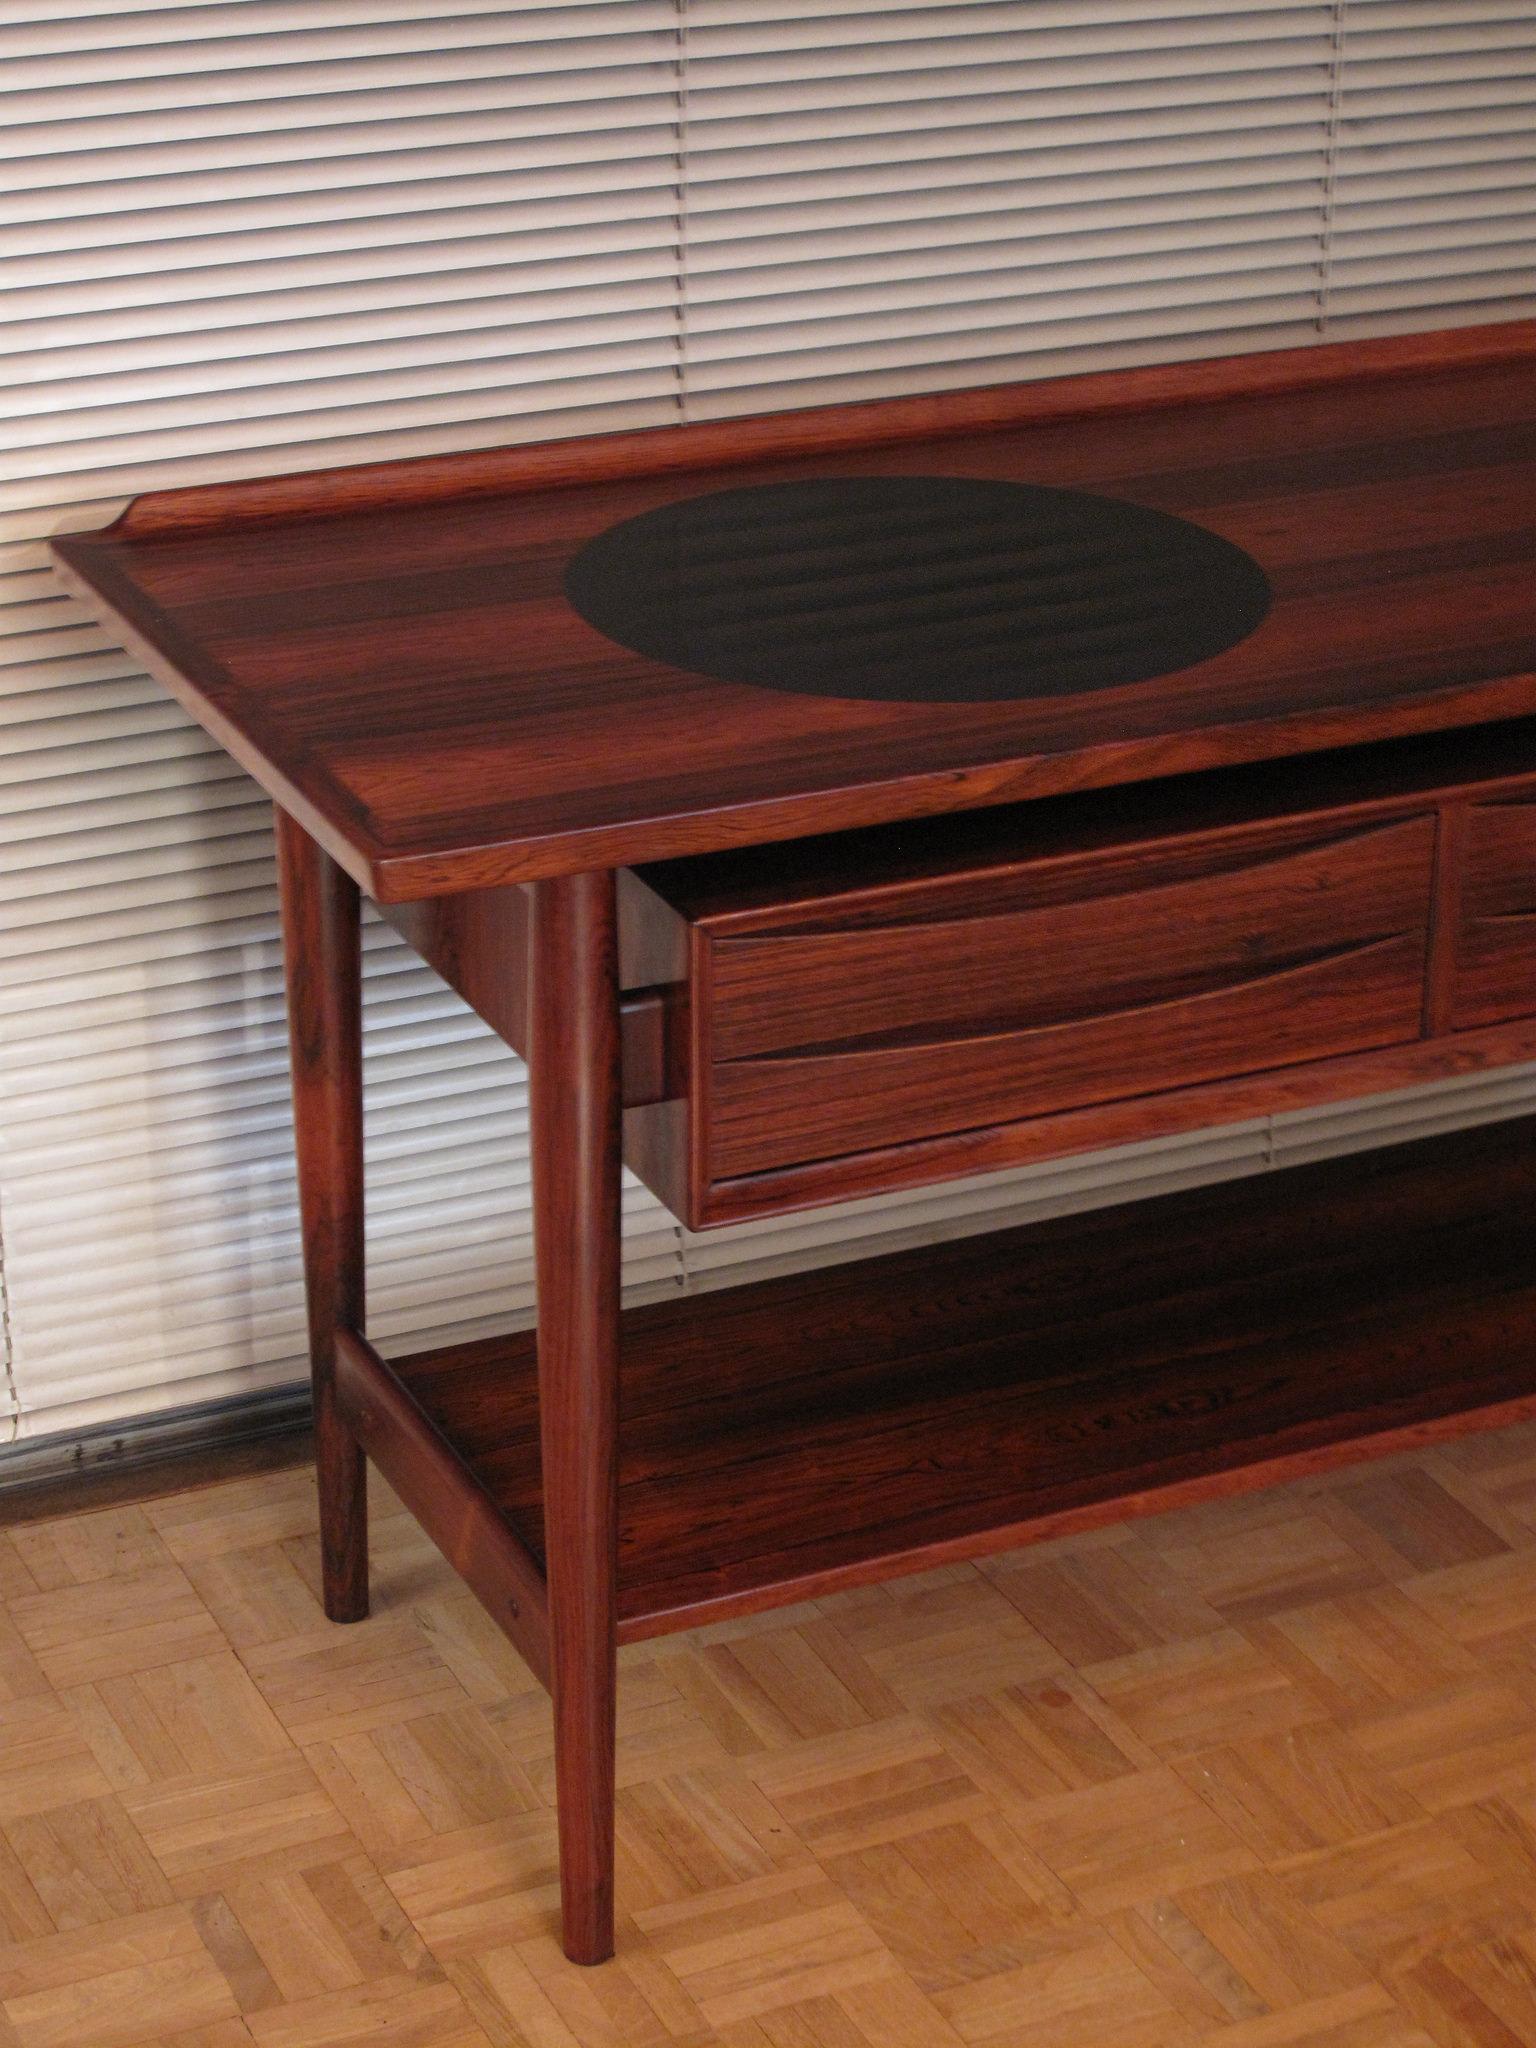 An incredibly handsome and very seldom seen Console table designed by Arne Vodder and produced by P. Olsen Sibast, Denmark.

Produced from Brazilian rosewood with four drawers finished in Vodder’s signature style which attractively float within